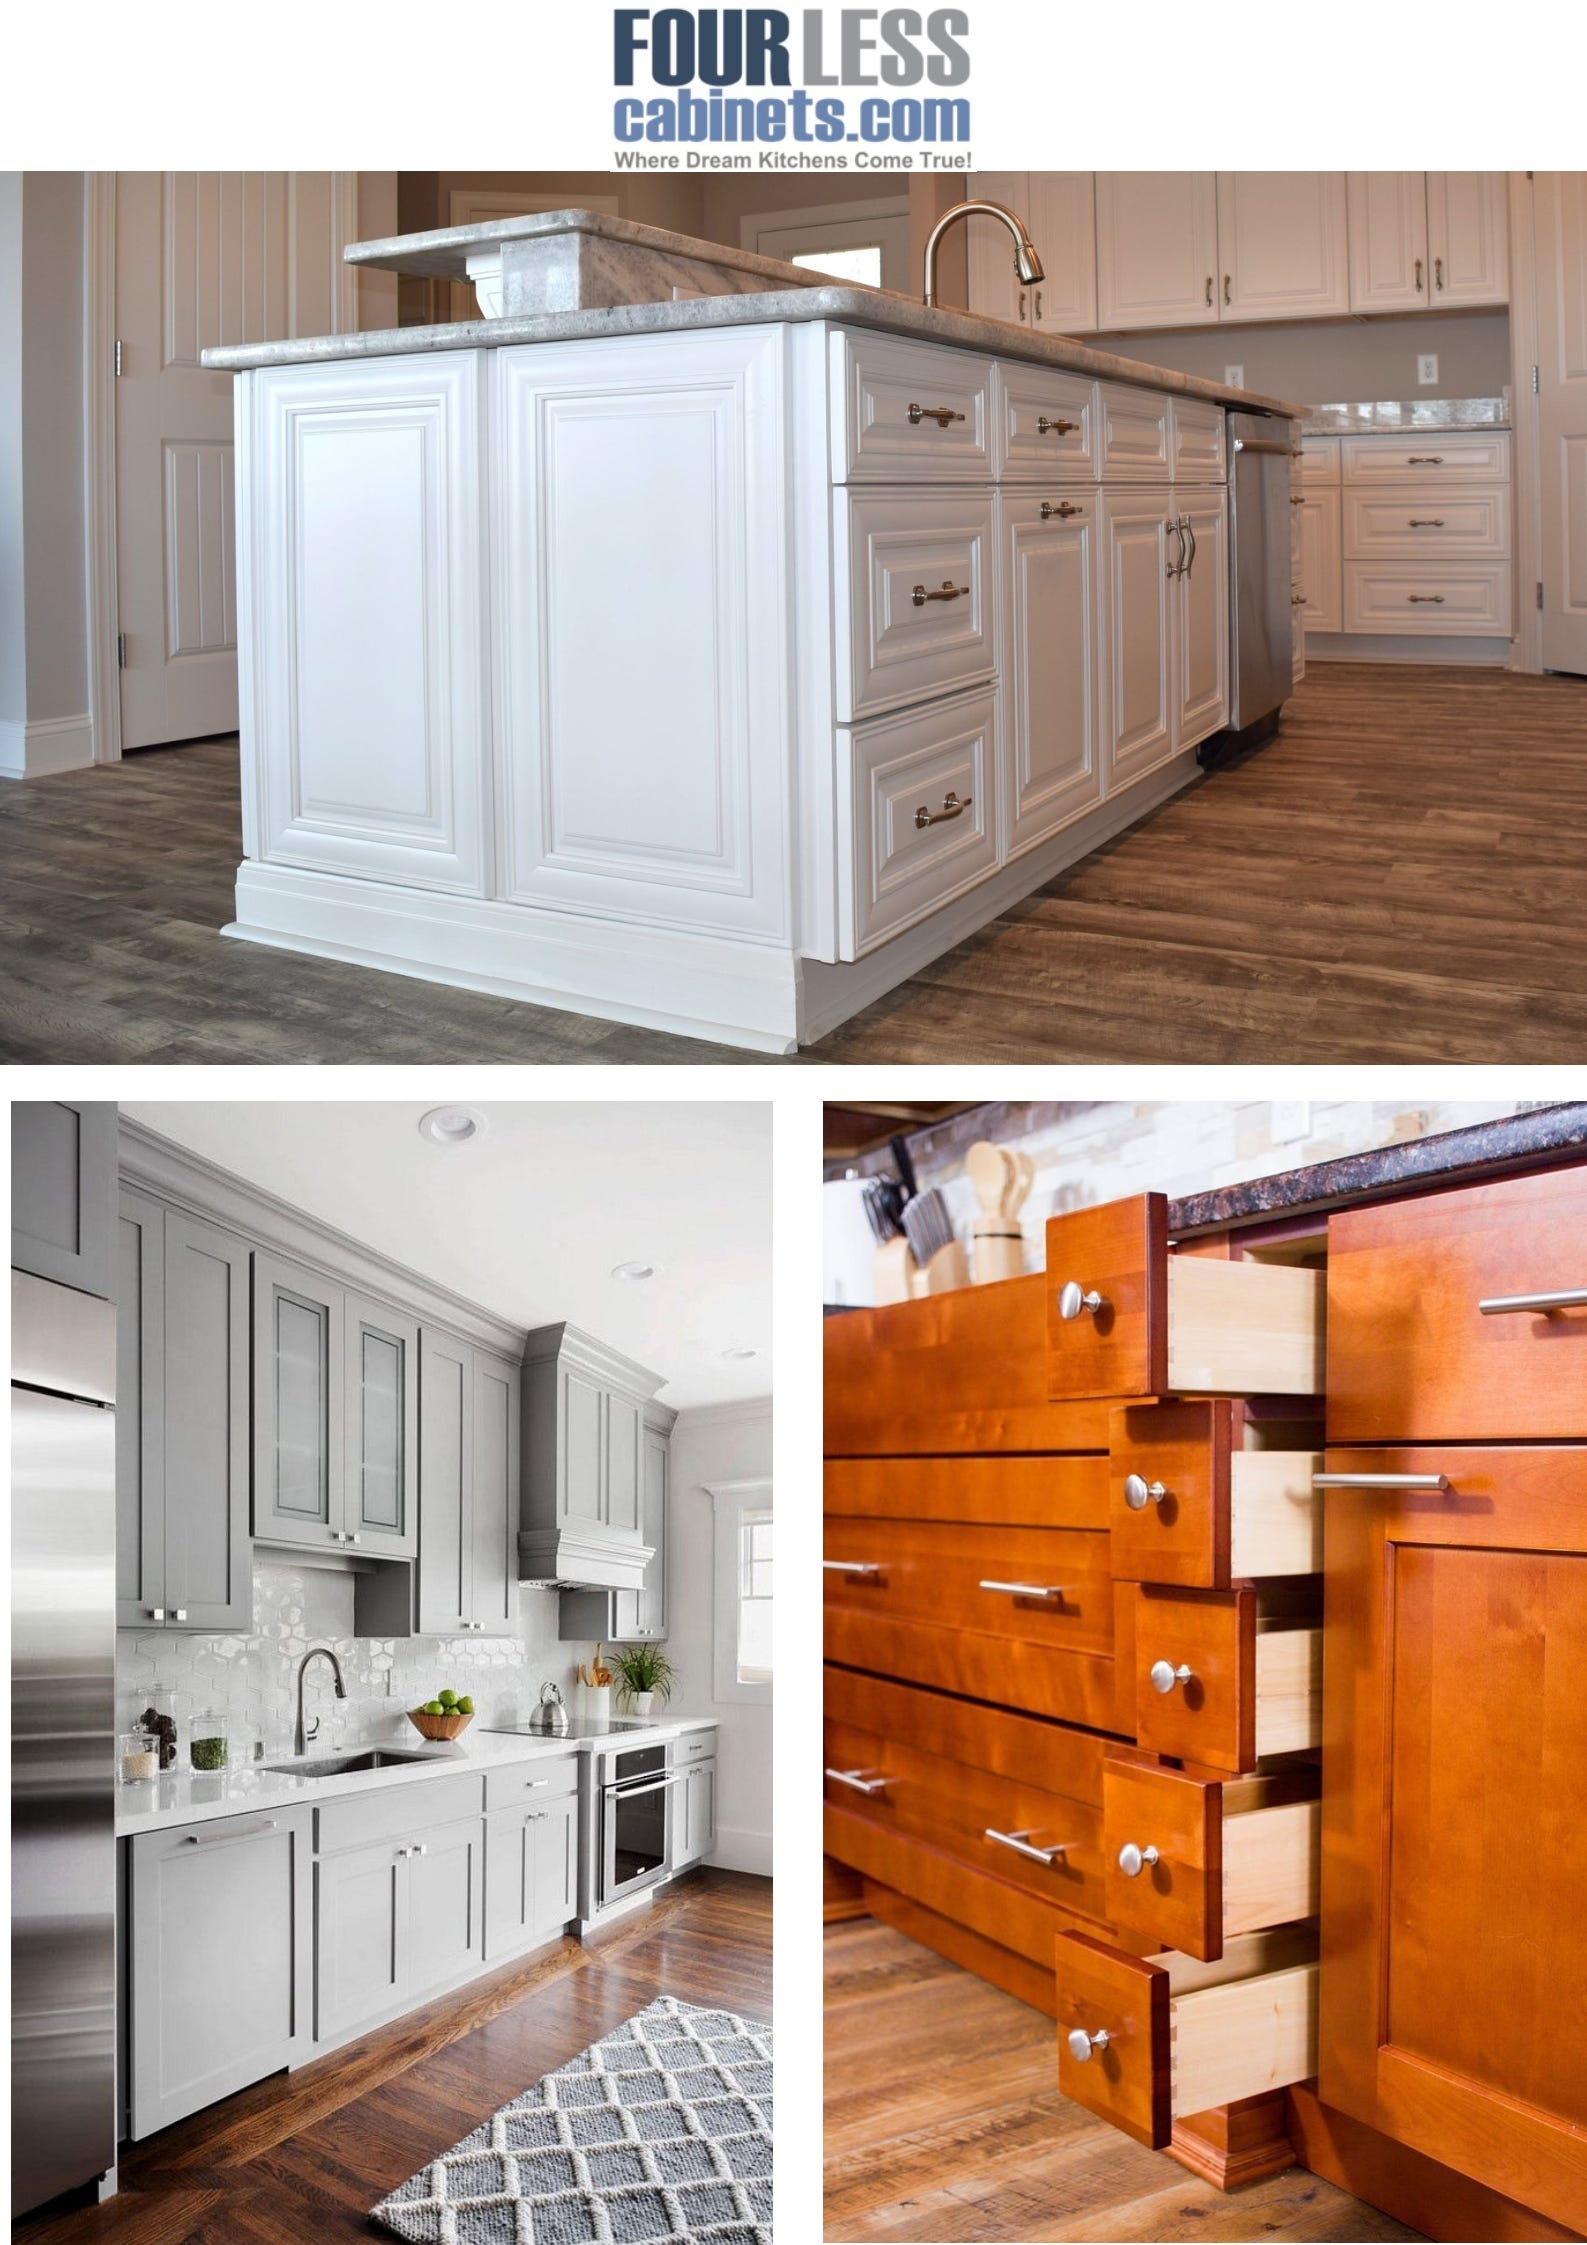 Buy White Kitchen Cabinets Four Less Cabinets By Four Less Cabinets Medium